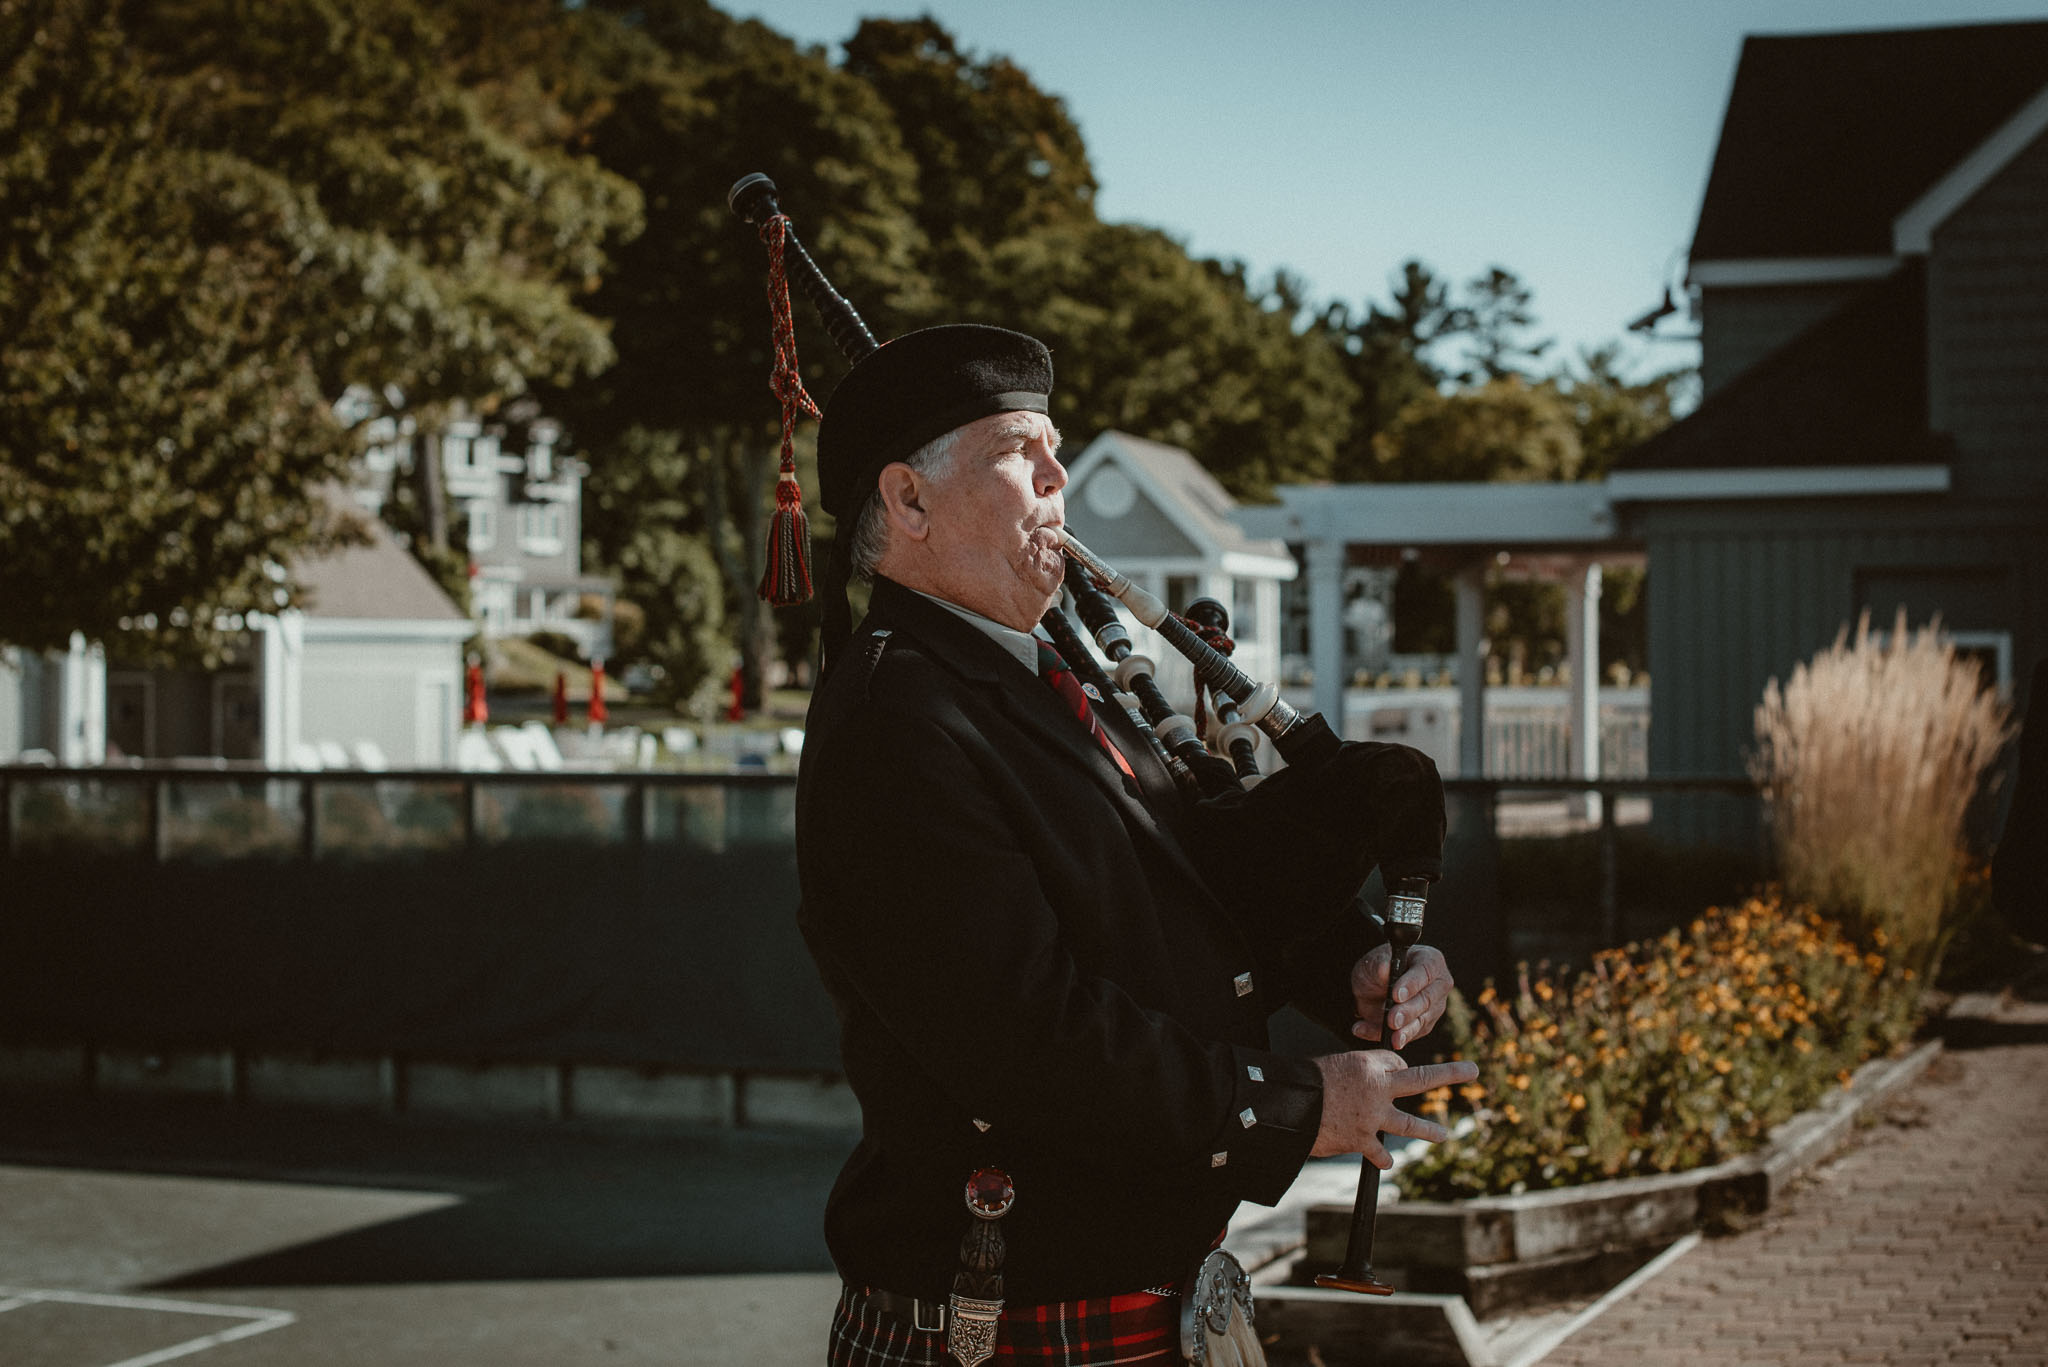 Bagpiper performing during the ceremony exit.